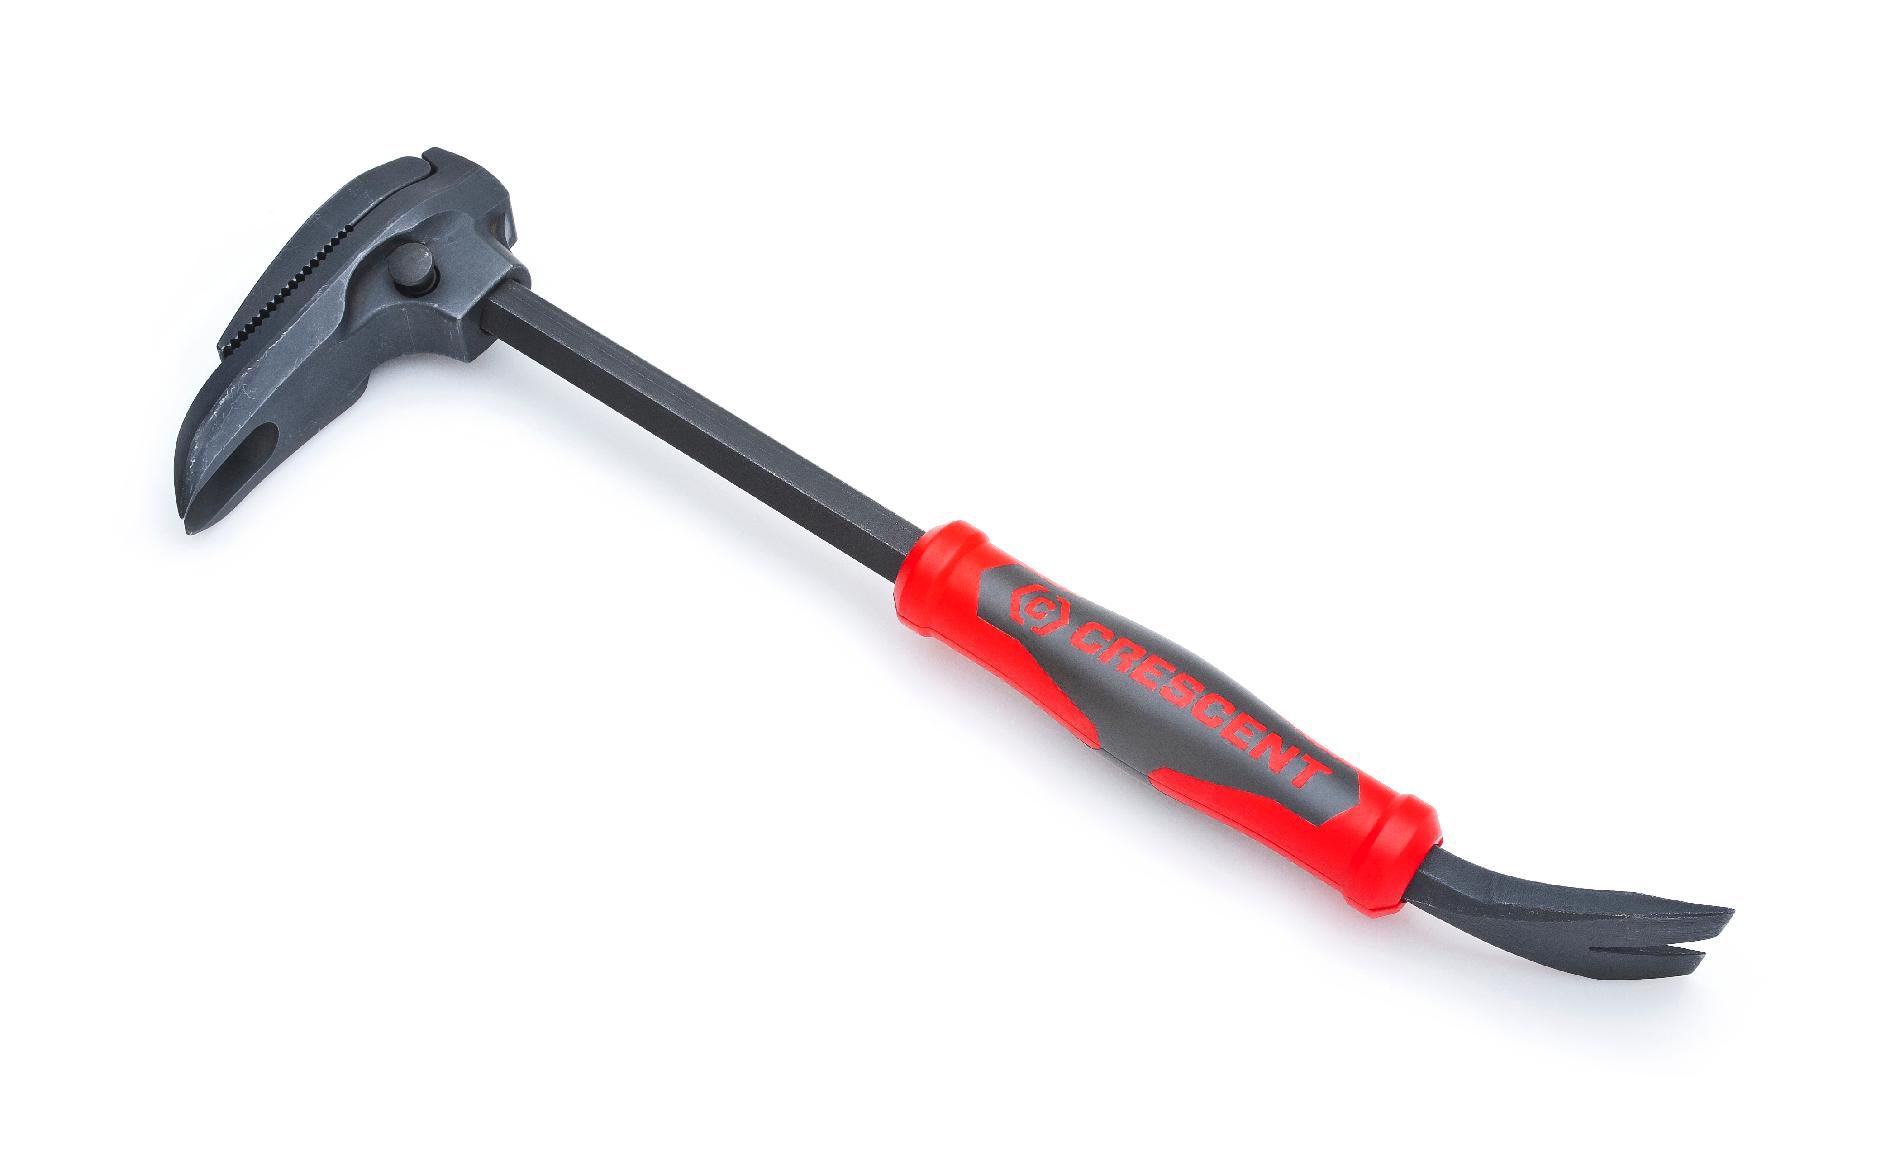 Crescent Adjustable Pry Bar, Nail Puller 16 Inch, Code Red